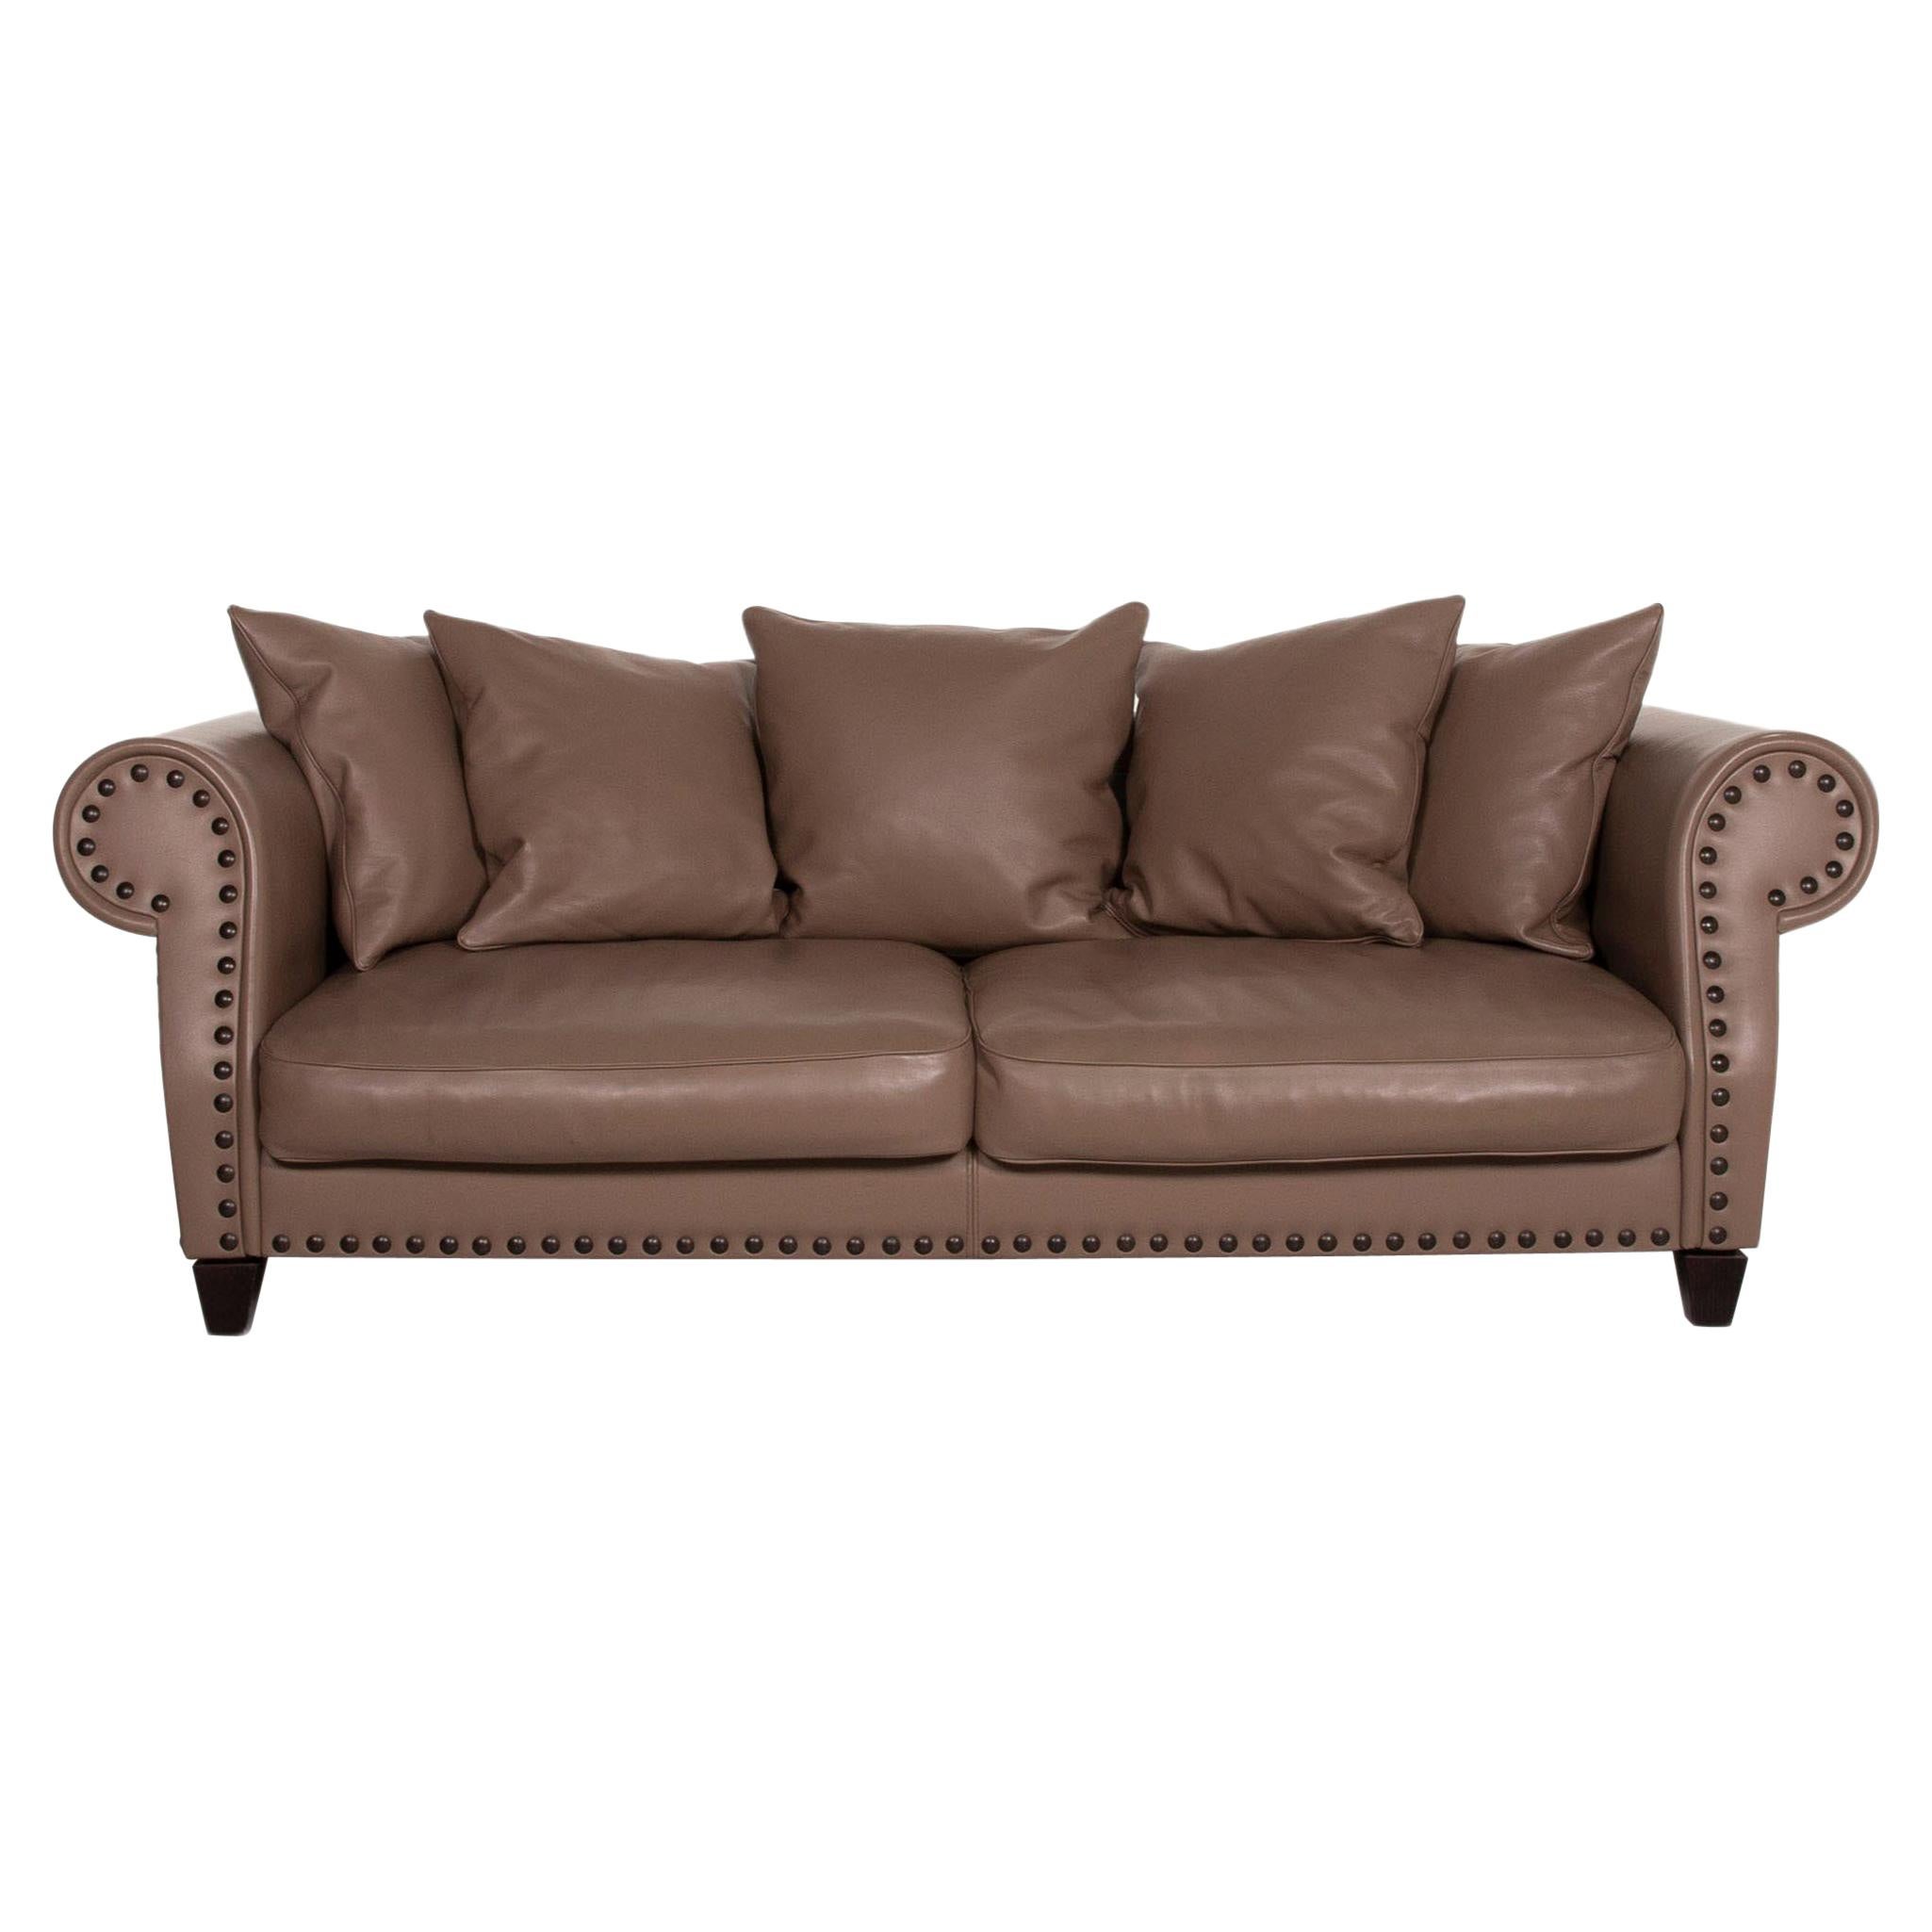 Roche Bobois Chester Chic Leather Sofa Brown Three-Seat For Sale